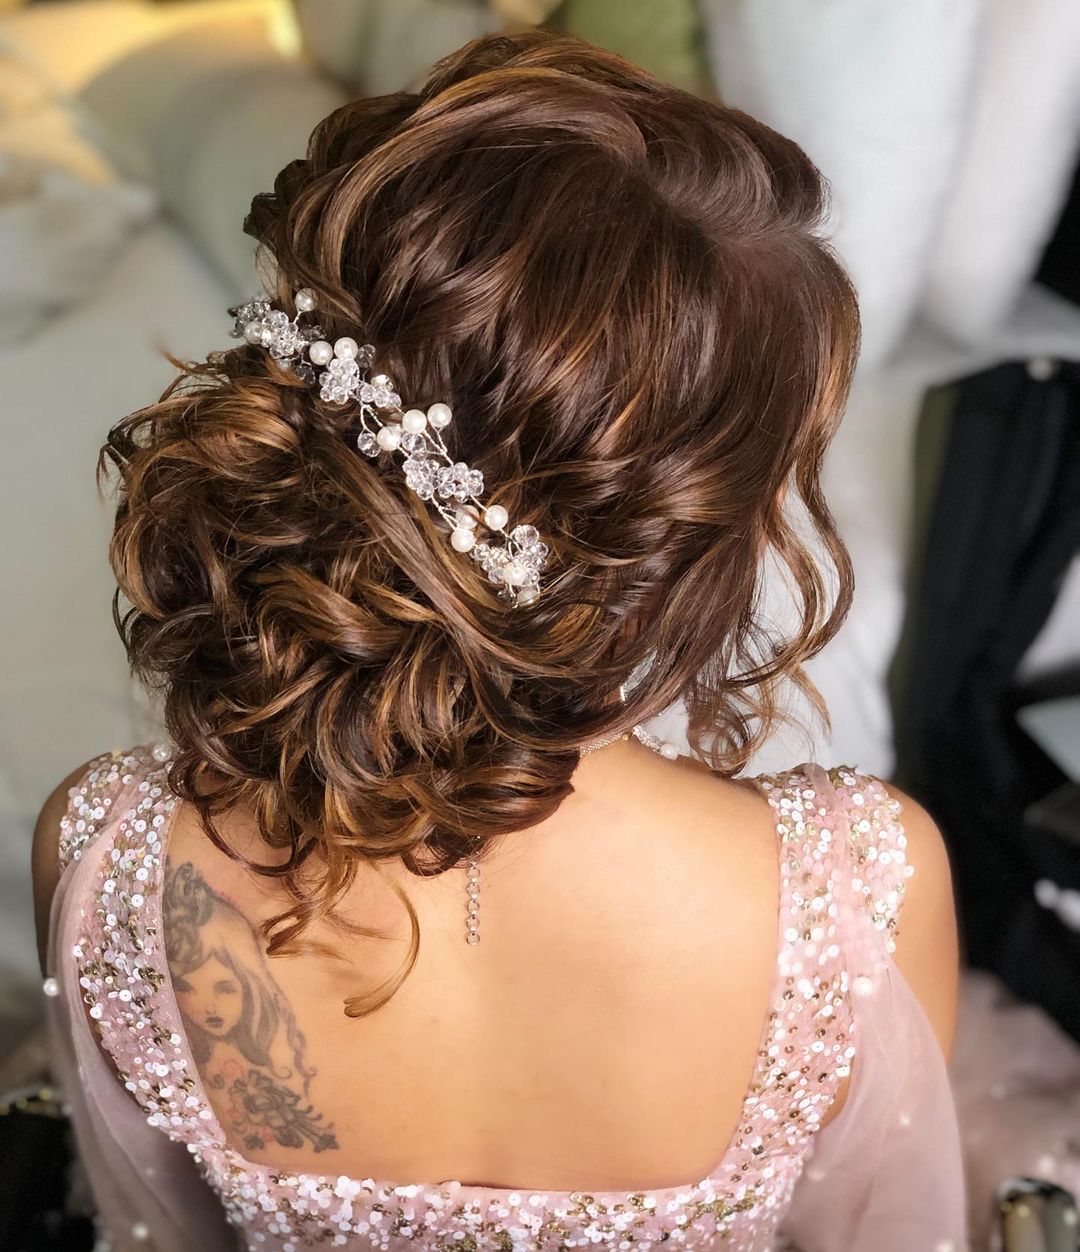 Traditional Indian Wedding Hairstyle